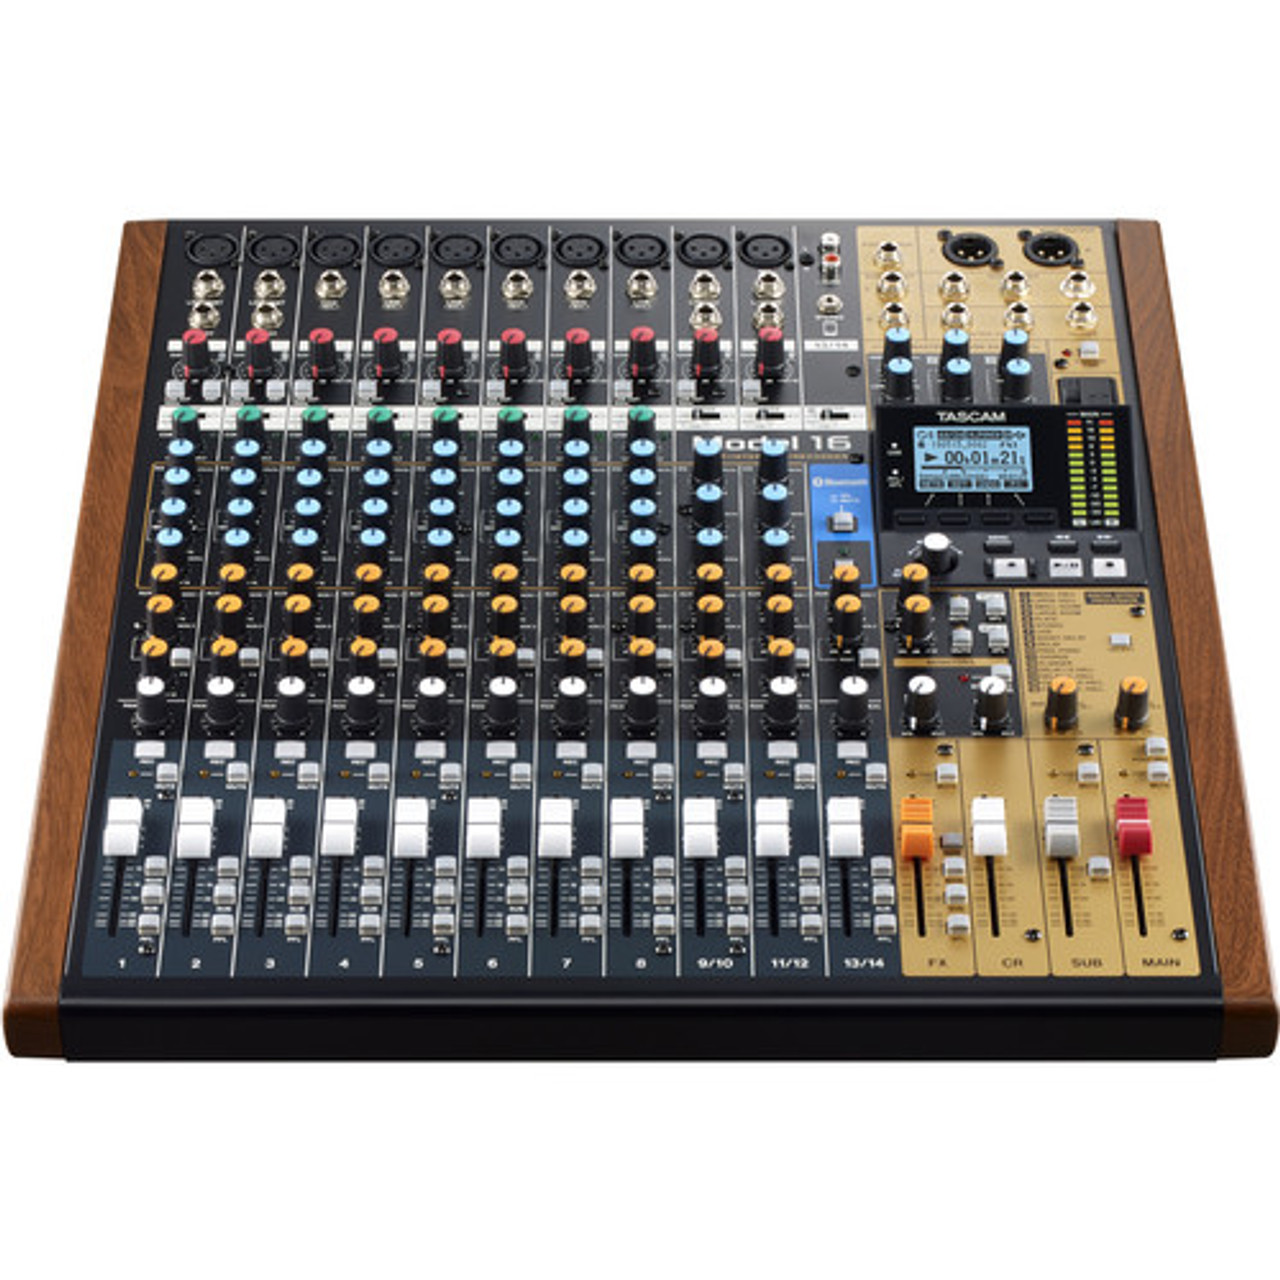 Tascam 16 Hybrid 14-Channel Mixer, Multitrack Recorder, and USB Audio Interface